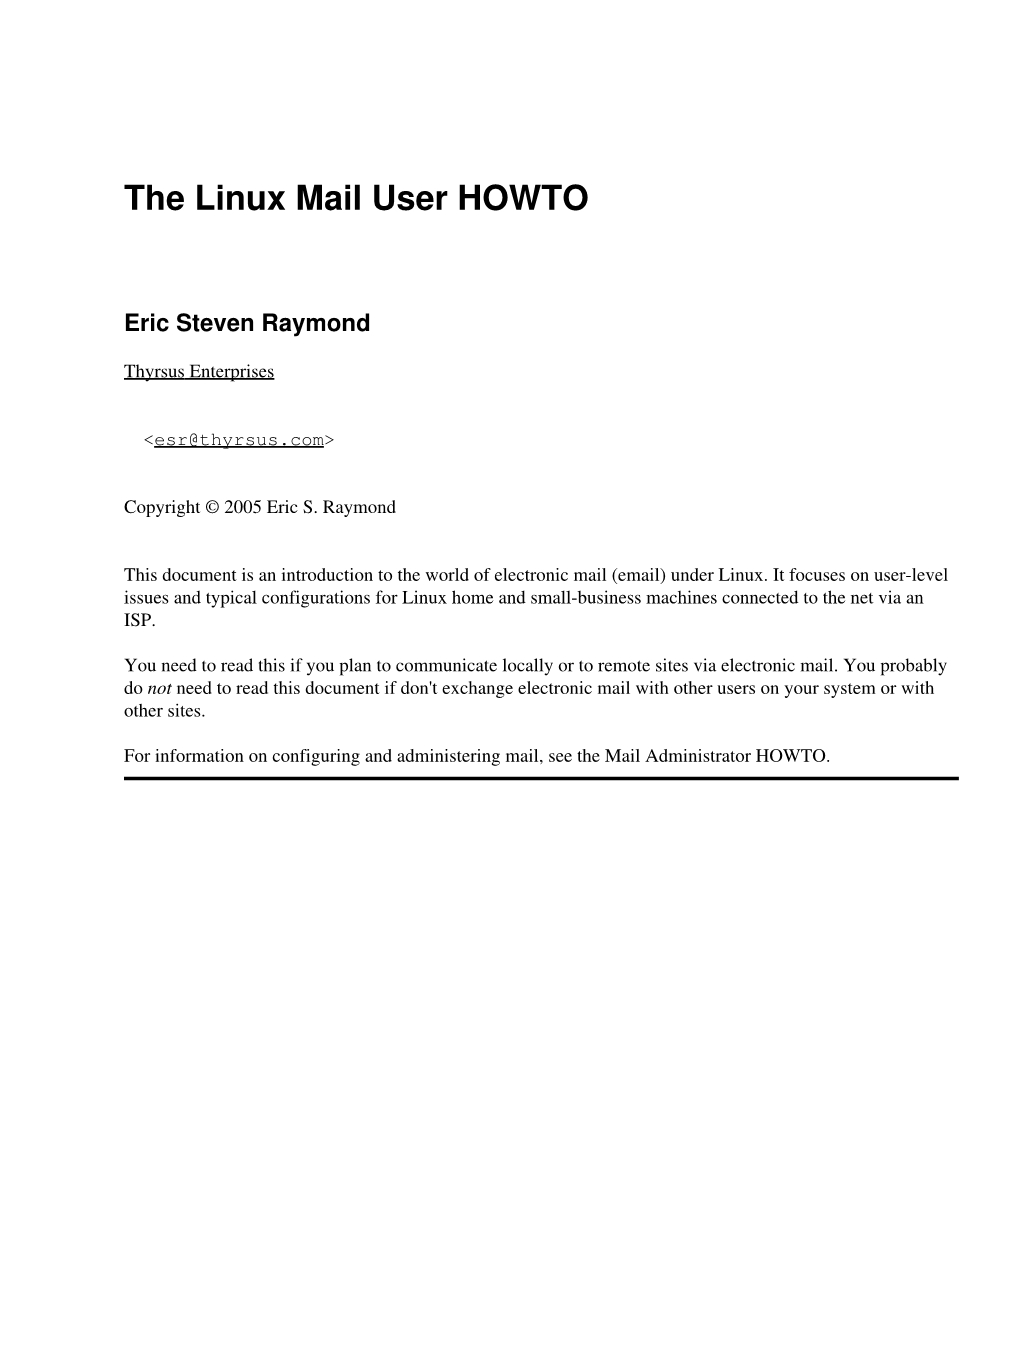 The Linux Mail User HOWTO